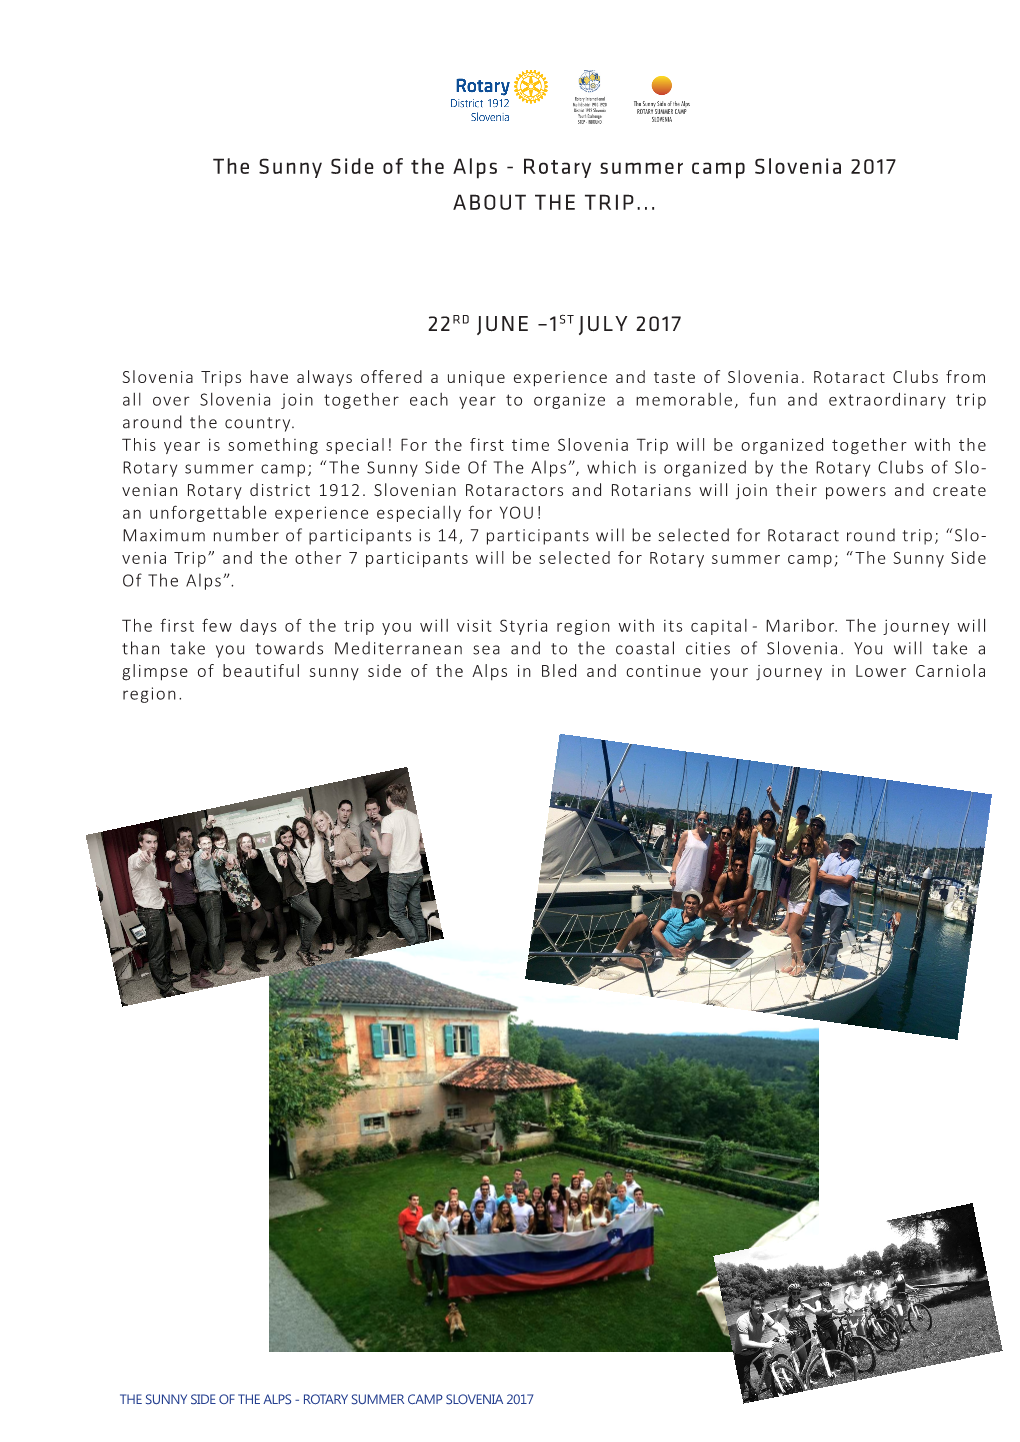 The Sunny Side of the Alps - Rotary Summer Camp Slovenia 2017 ABOUT the TRIP